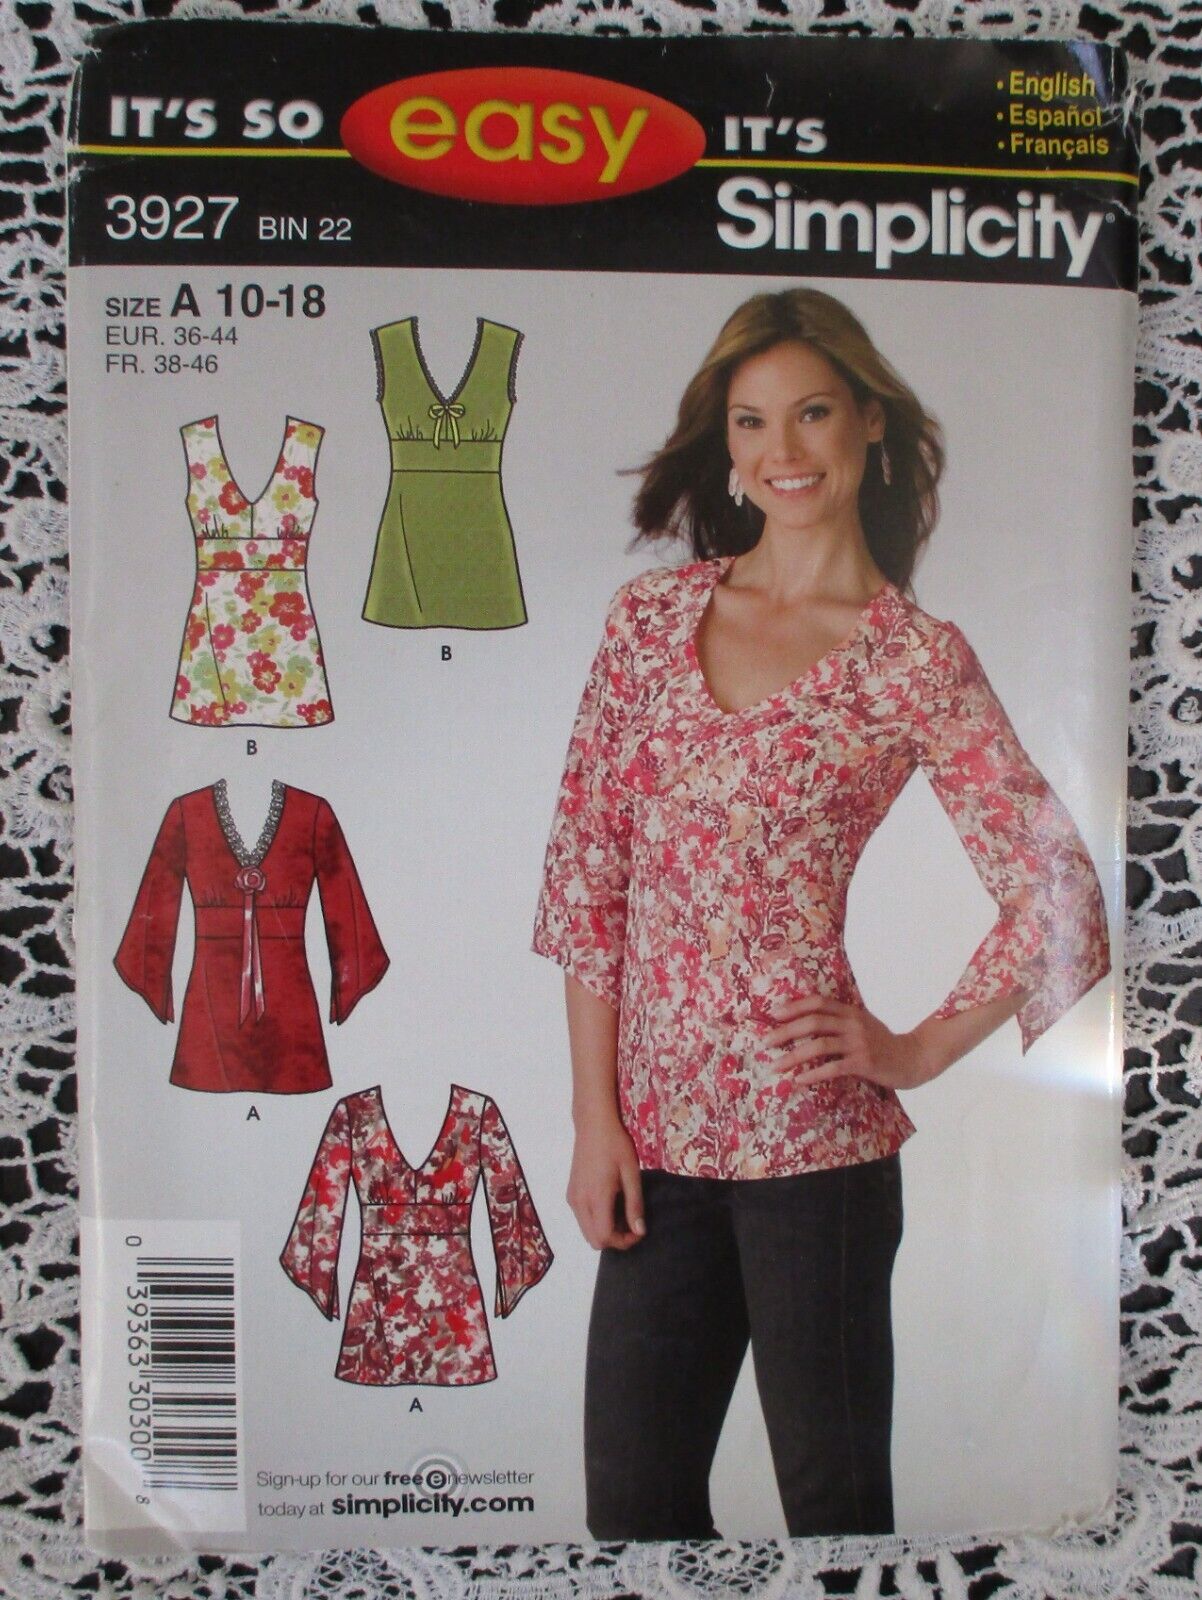 Simplicity 3927 It's So Easy Misses Tunic Top Size 10-18 NEW - $9.25